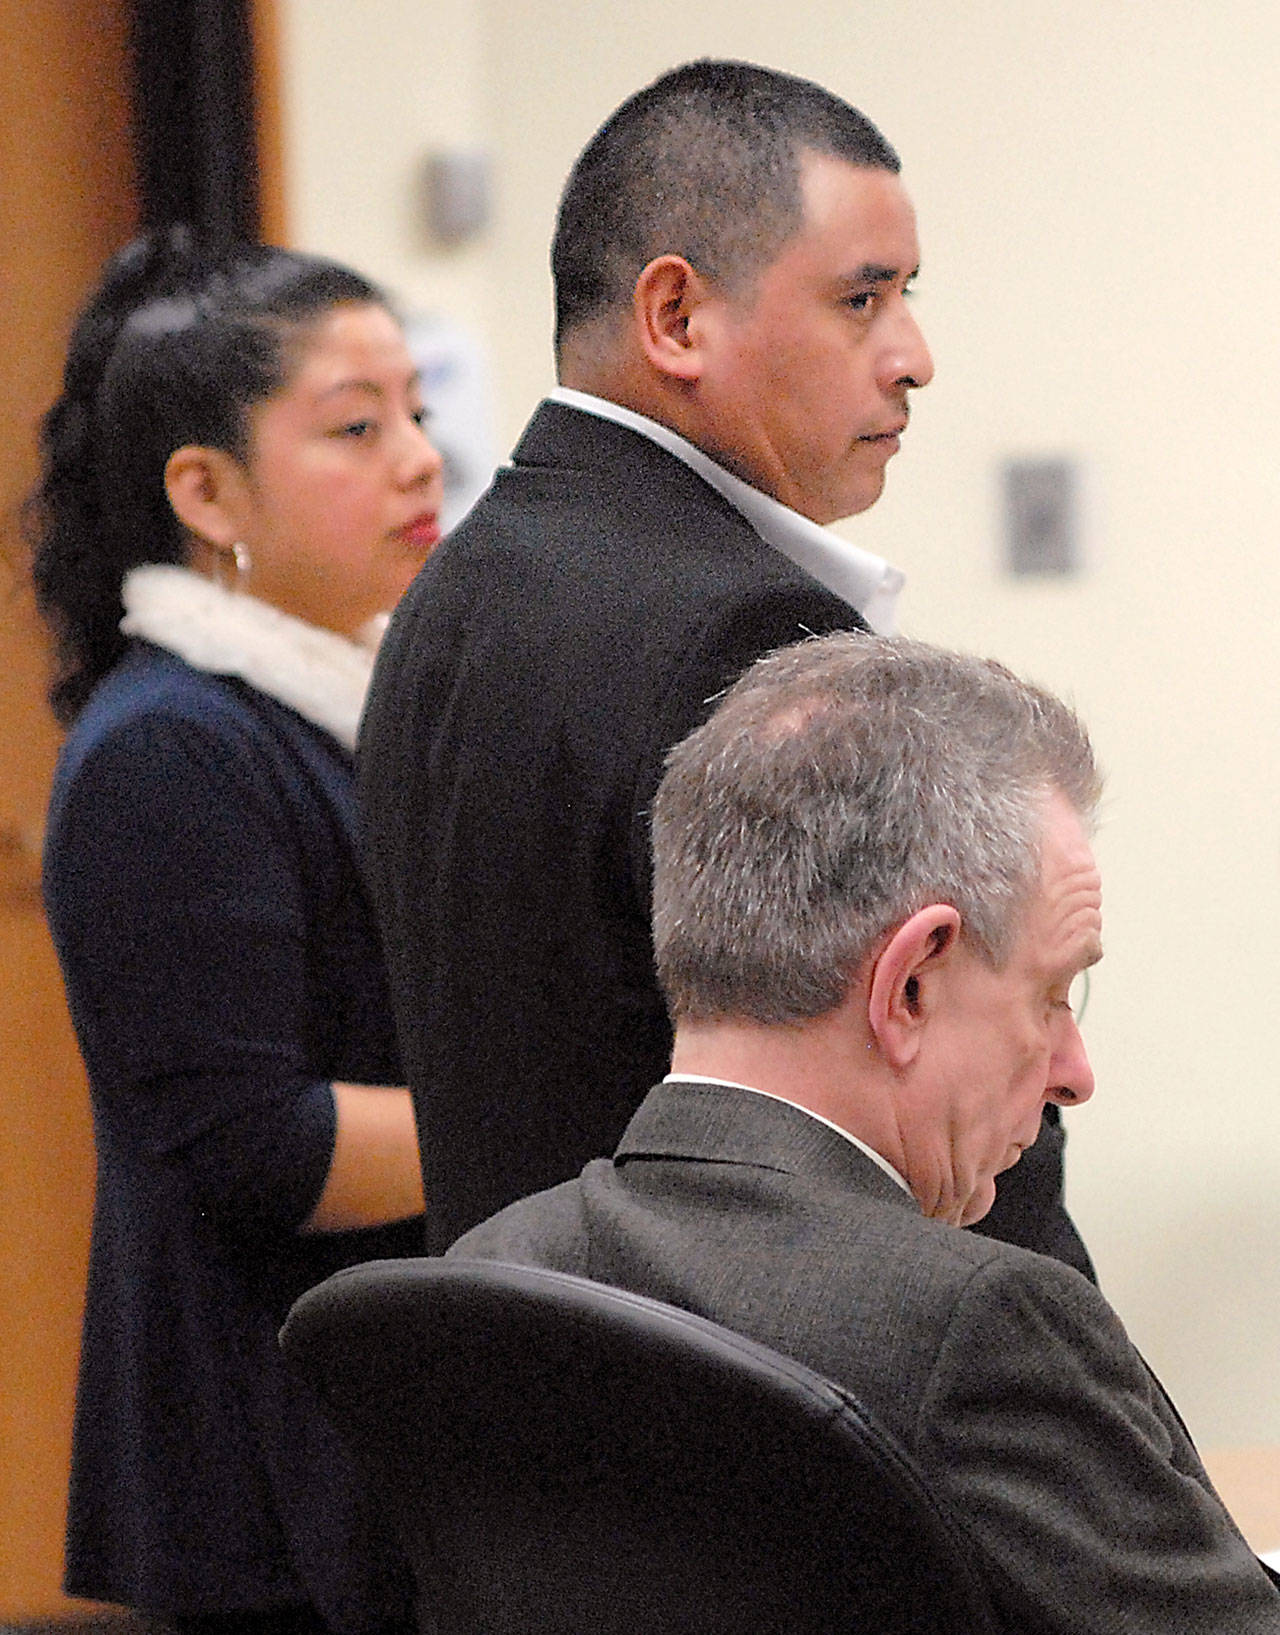 Martin Perez stands in Clallam County Superior Court during his rape trial Thursday. He is flanked by interpreter Bertilda Mendoza and defense attorney John Hayden. The trial resulted in a hung jury. (Keith Thorpe/Peninsula Daily News)